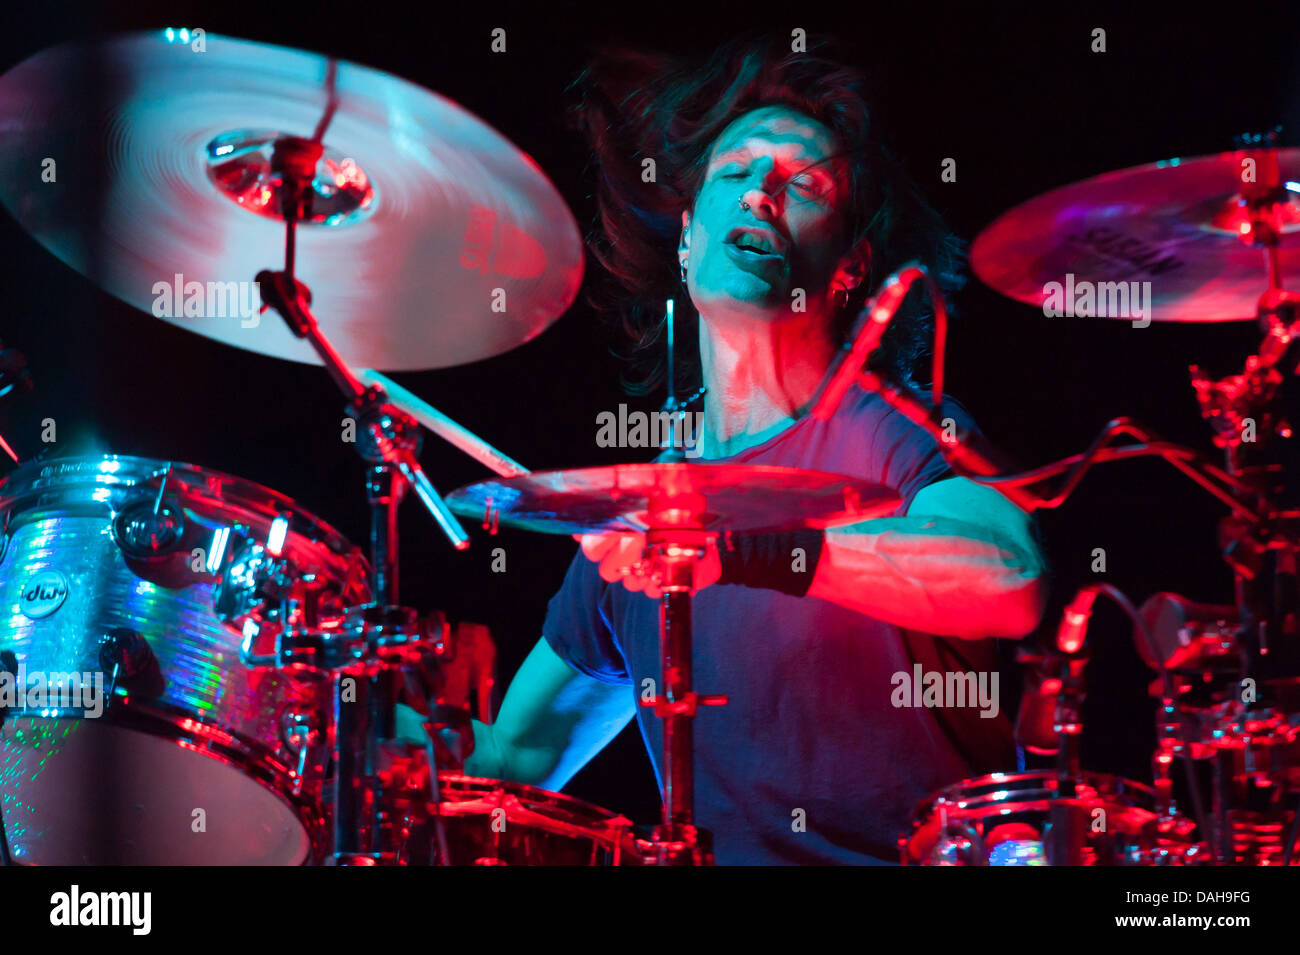 London Ontario, Canada. Alice In Chains drummer Sean Kinney performs with the band during a concert at the Budweiser Gardens in London Ontario, Canada on July 11, 2013.  Formed in the late 1980s the band as often been associated with the 'grunge' movement that was emerging at the time. Credit:  Mark Spowart/Alamy Live News Stock Photo